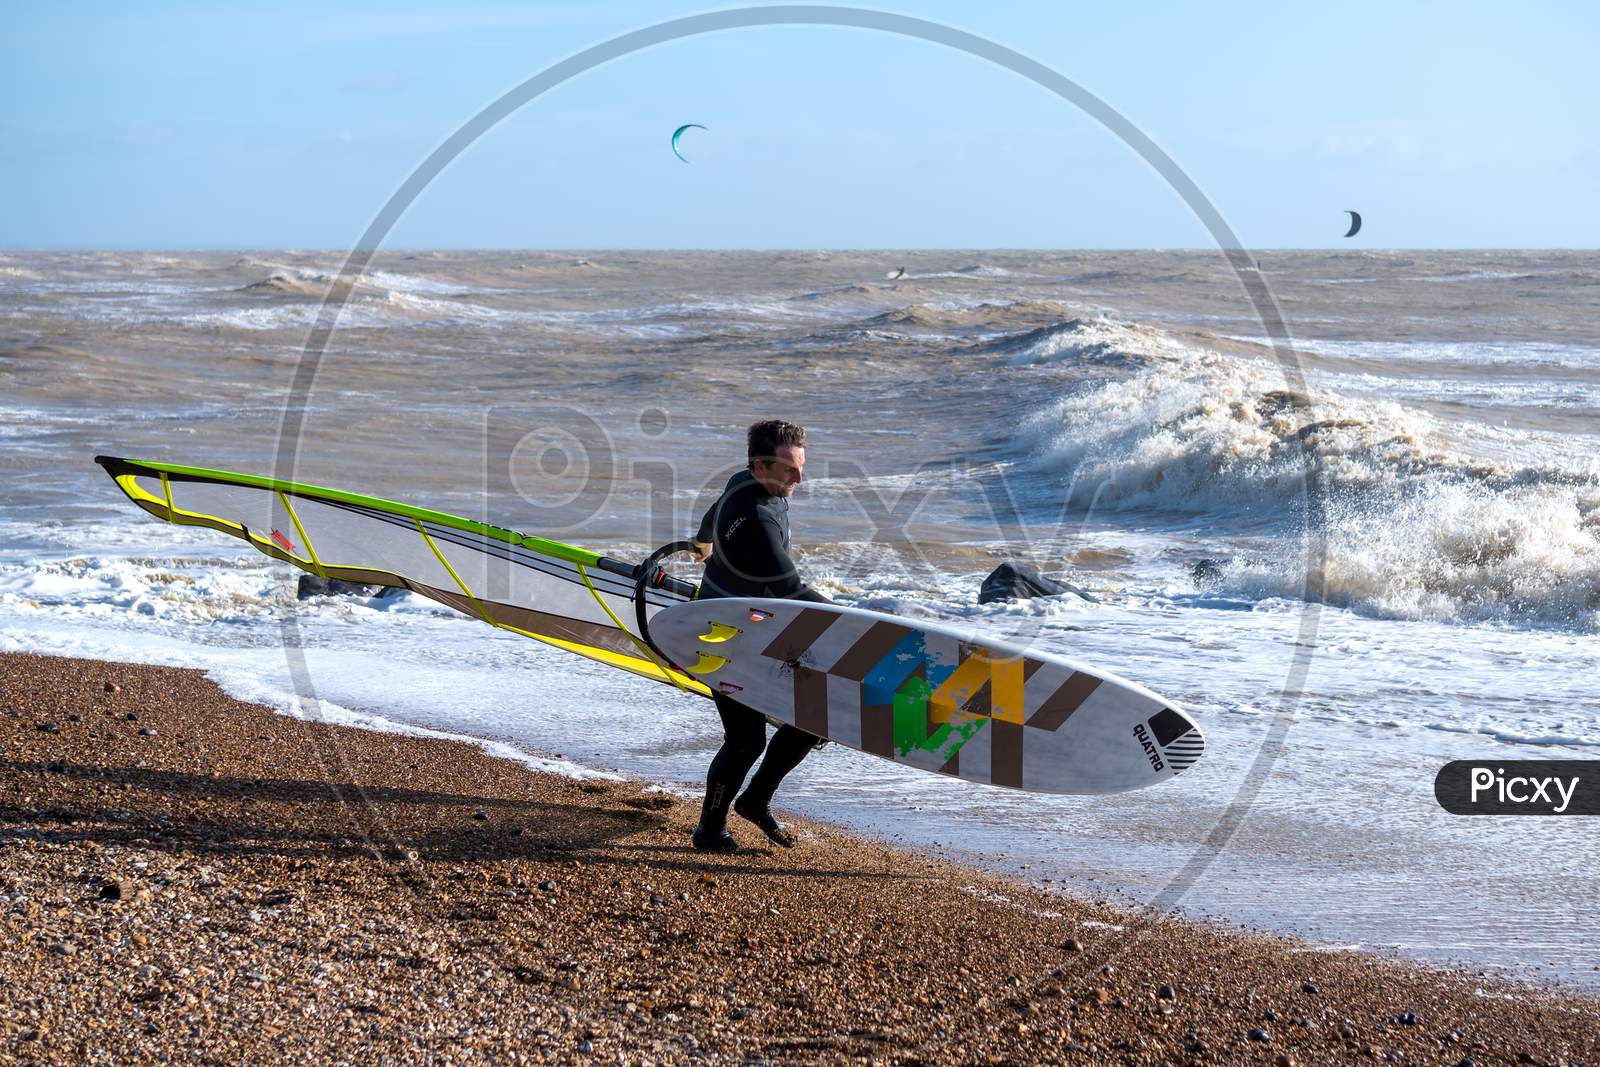 Goring-By-Sea, West Sussex/Uk - January 28 : Windsurfer At Goring-By-Sea In West Sussex On January 28, 2020. Unidentified Person